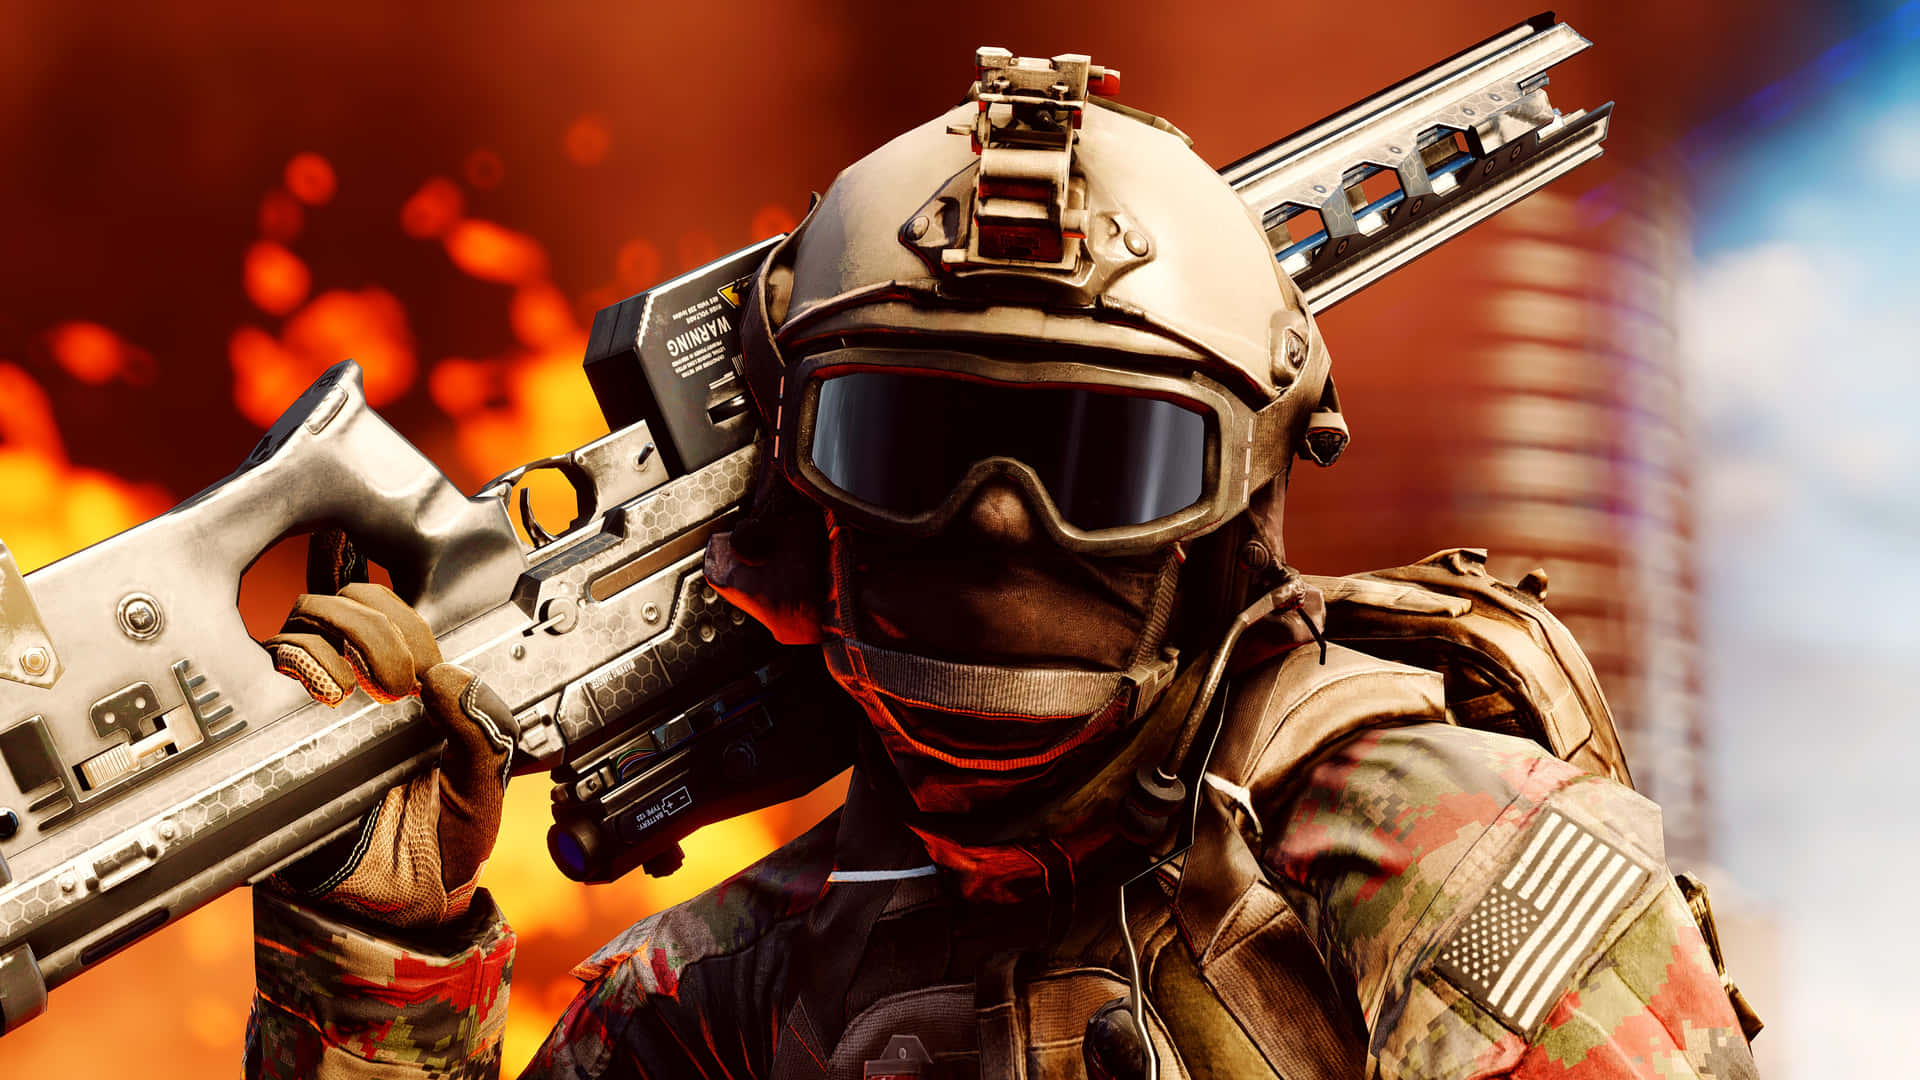 Image  Feel the thrill of all-out war in Battlefield 4